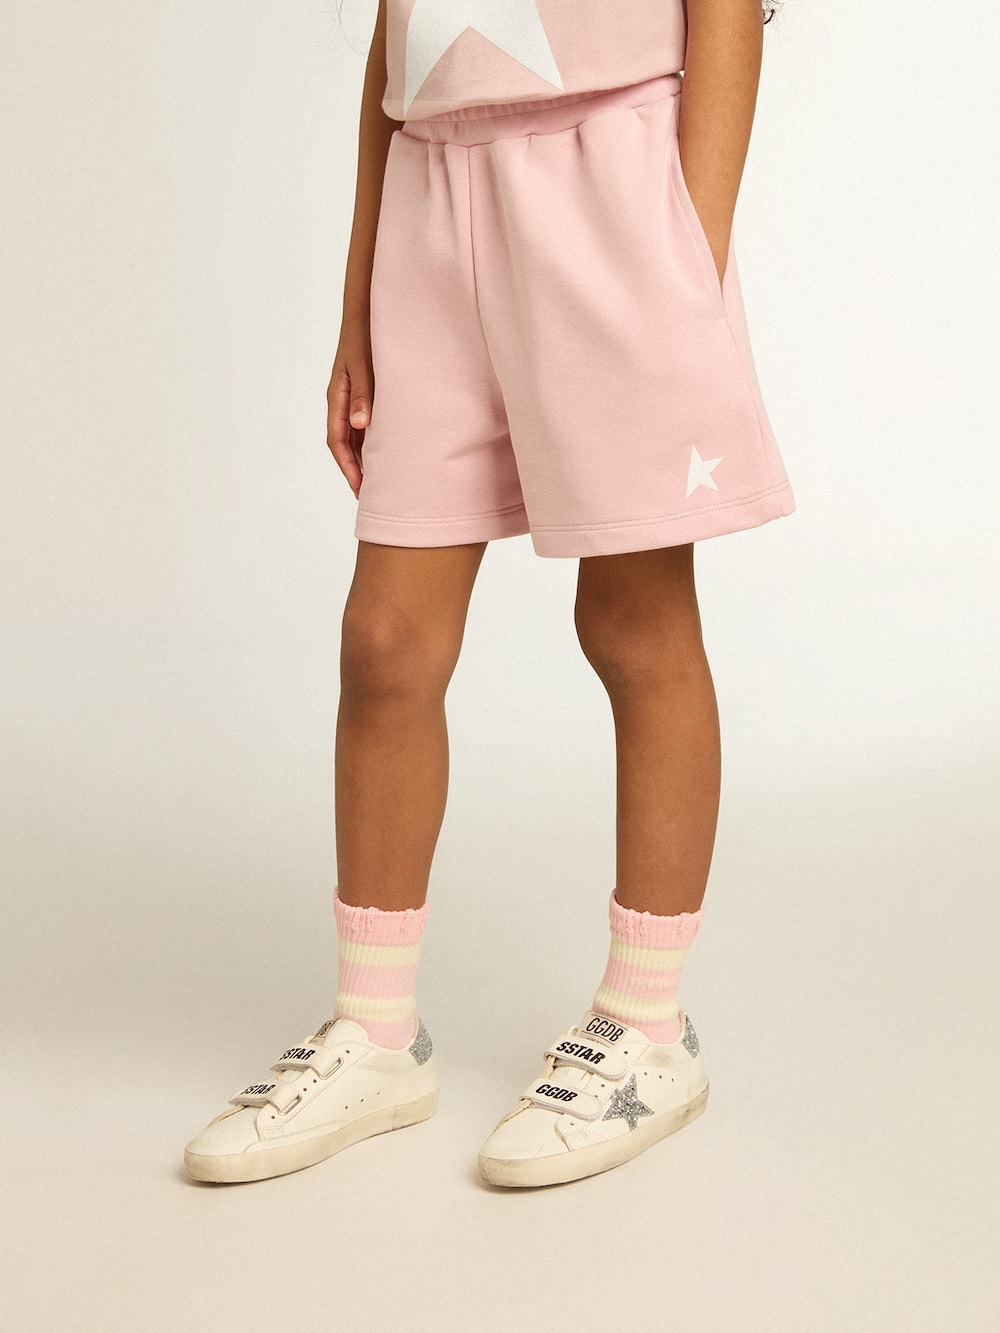 Golden Goose - Girls’ shorts in pink with white star in 